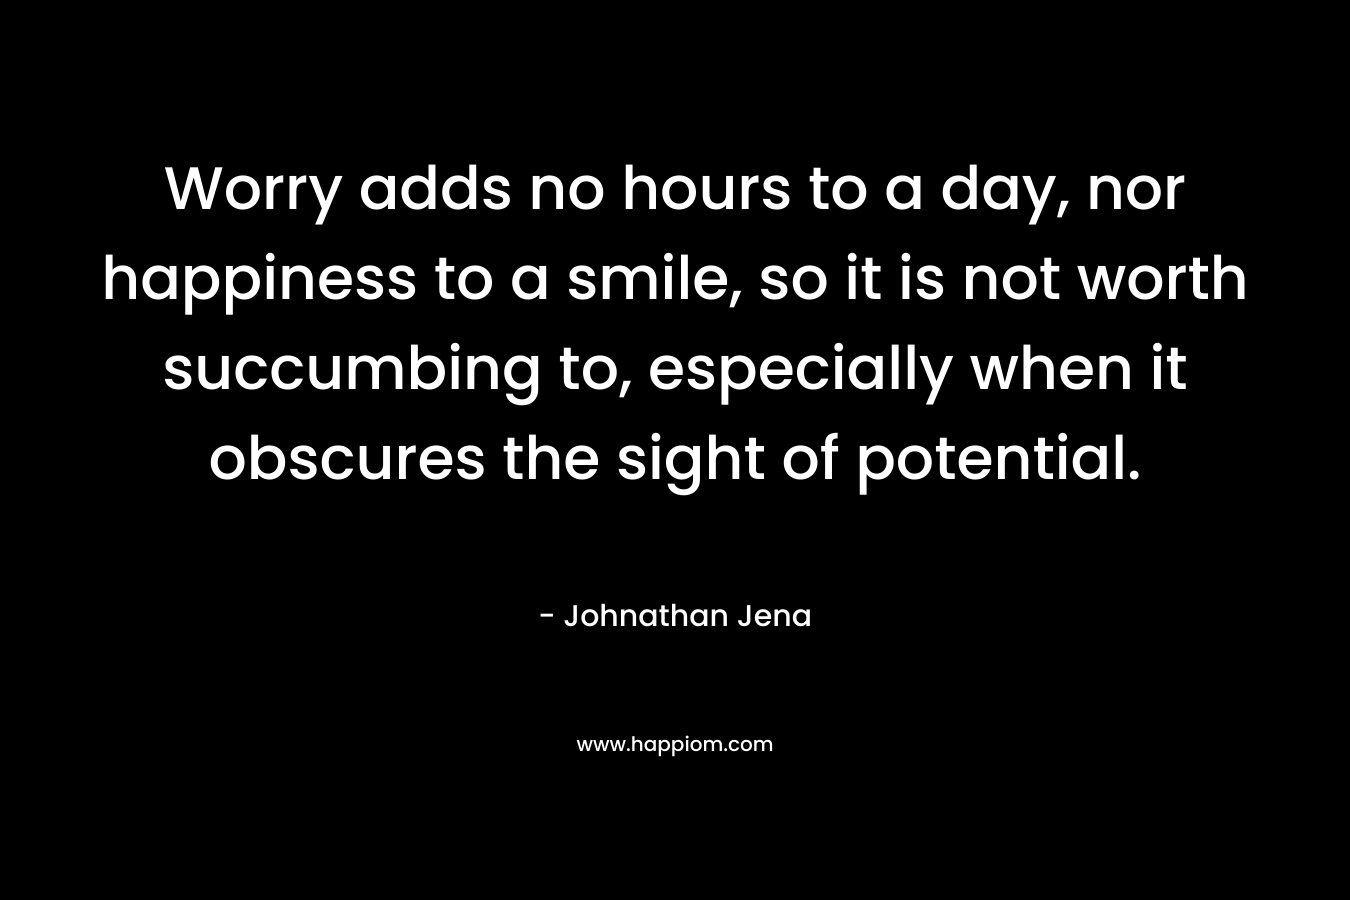 Worry adds no hours to a day, nor happiness to a smile, so it is not worth succumbing to, especially when it obscures the sight of potential. – Johnathan Jena